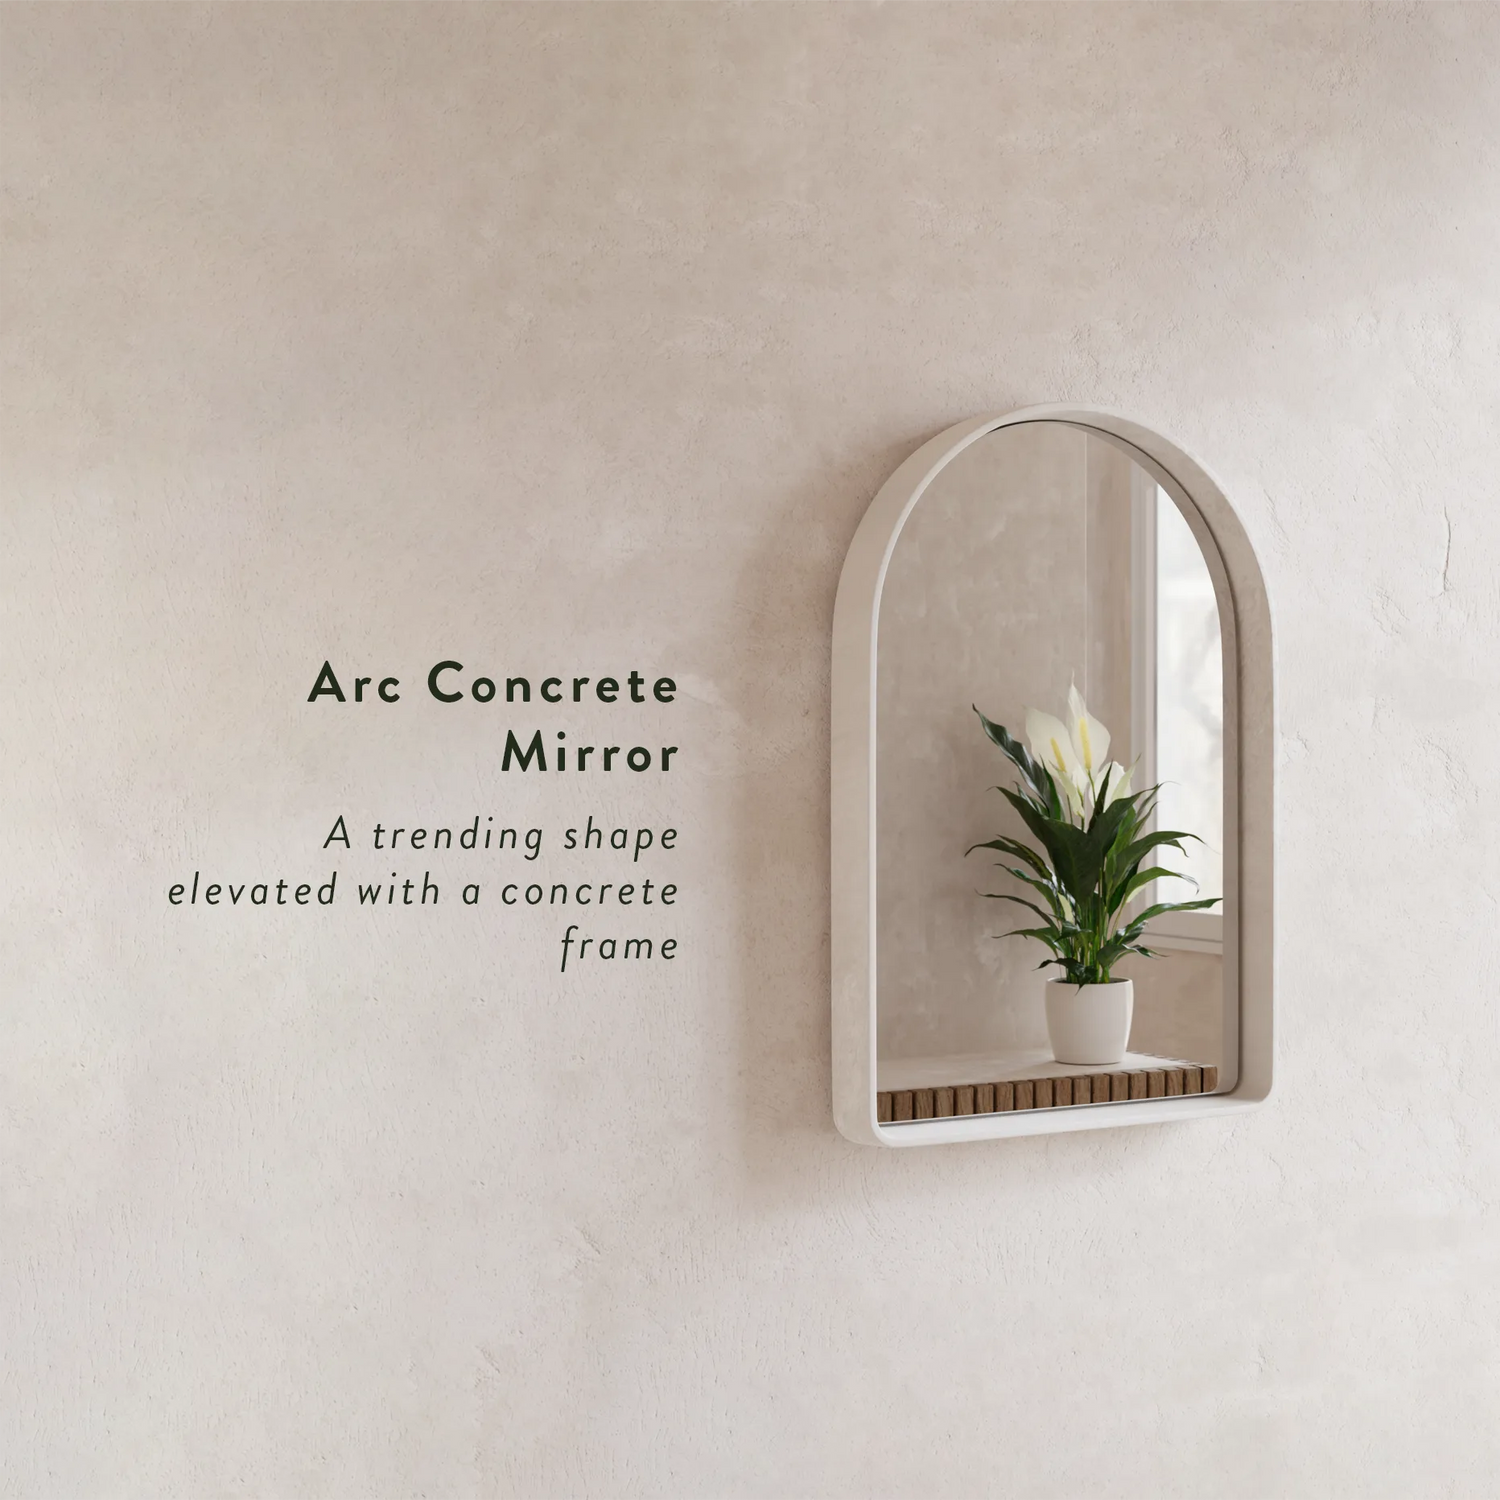 A white Arc Concrete Mirror mounted on a cream microcement rendered wall with the text "Arc Concrete MIrror - a trending shape elevated with a concrete frame"